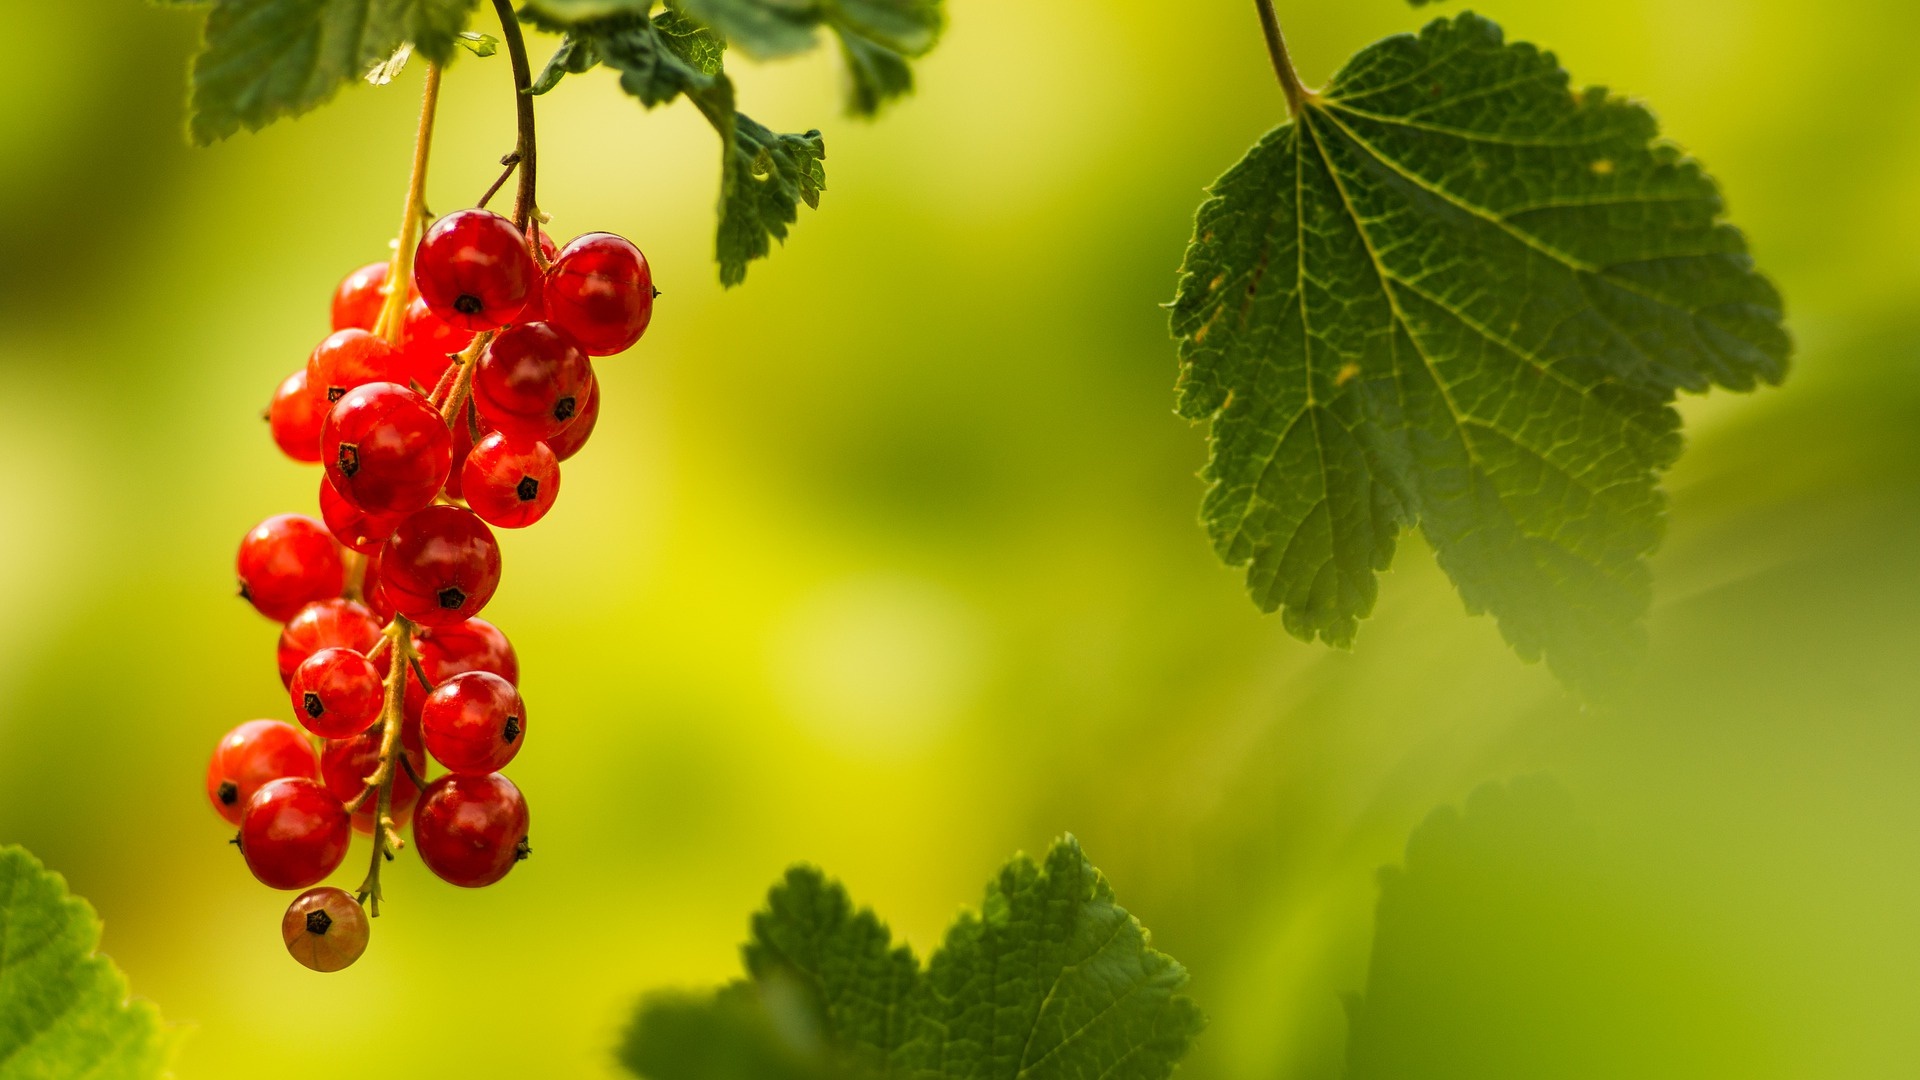 Juicy currants, Mouthwatering treat, Berrylicious delight, Nature's candy, 1920x1080 Full HD Desktop